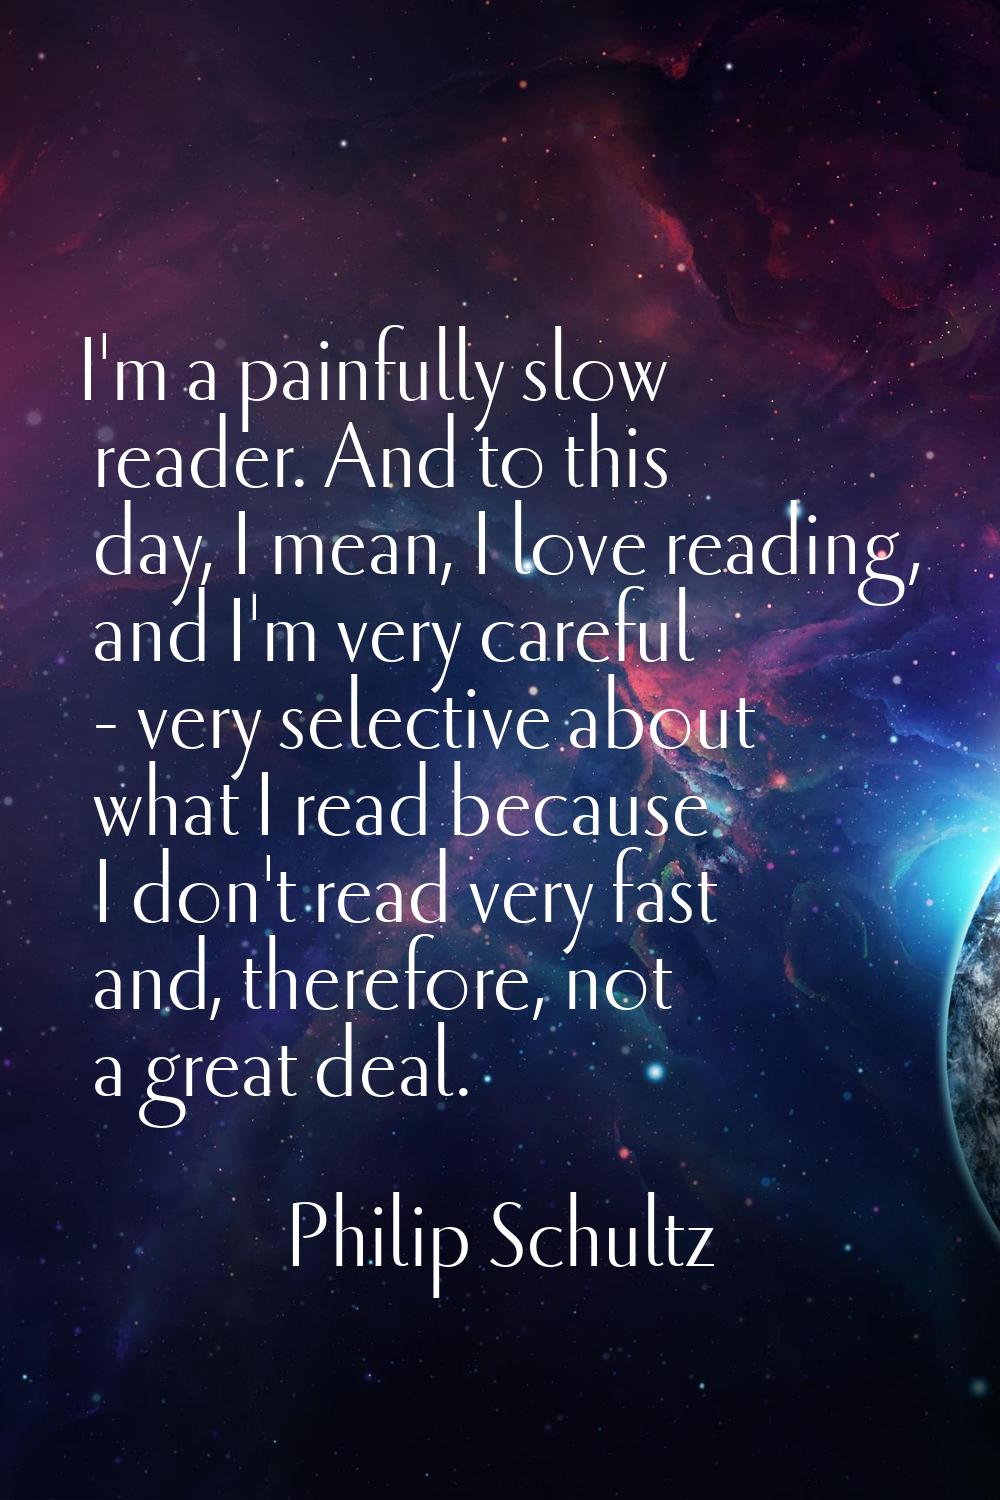 I'm a painfully slow reader. And to this day, I mean, I love reading, and I'm very careful - very s